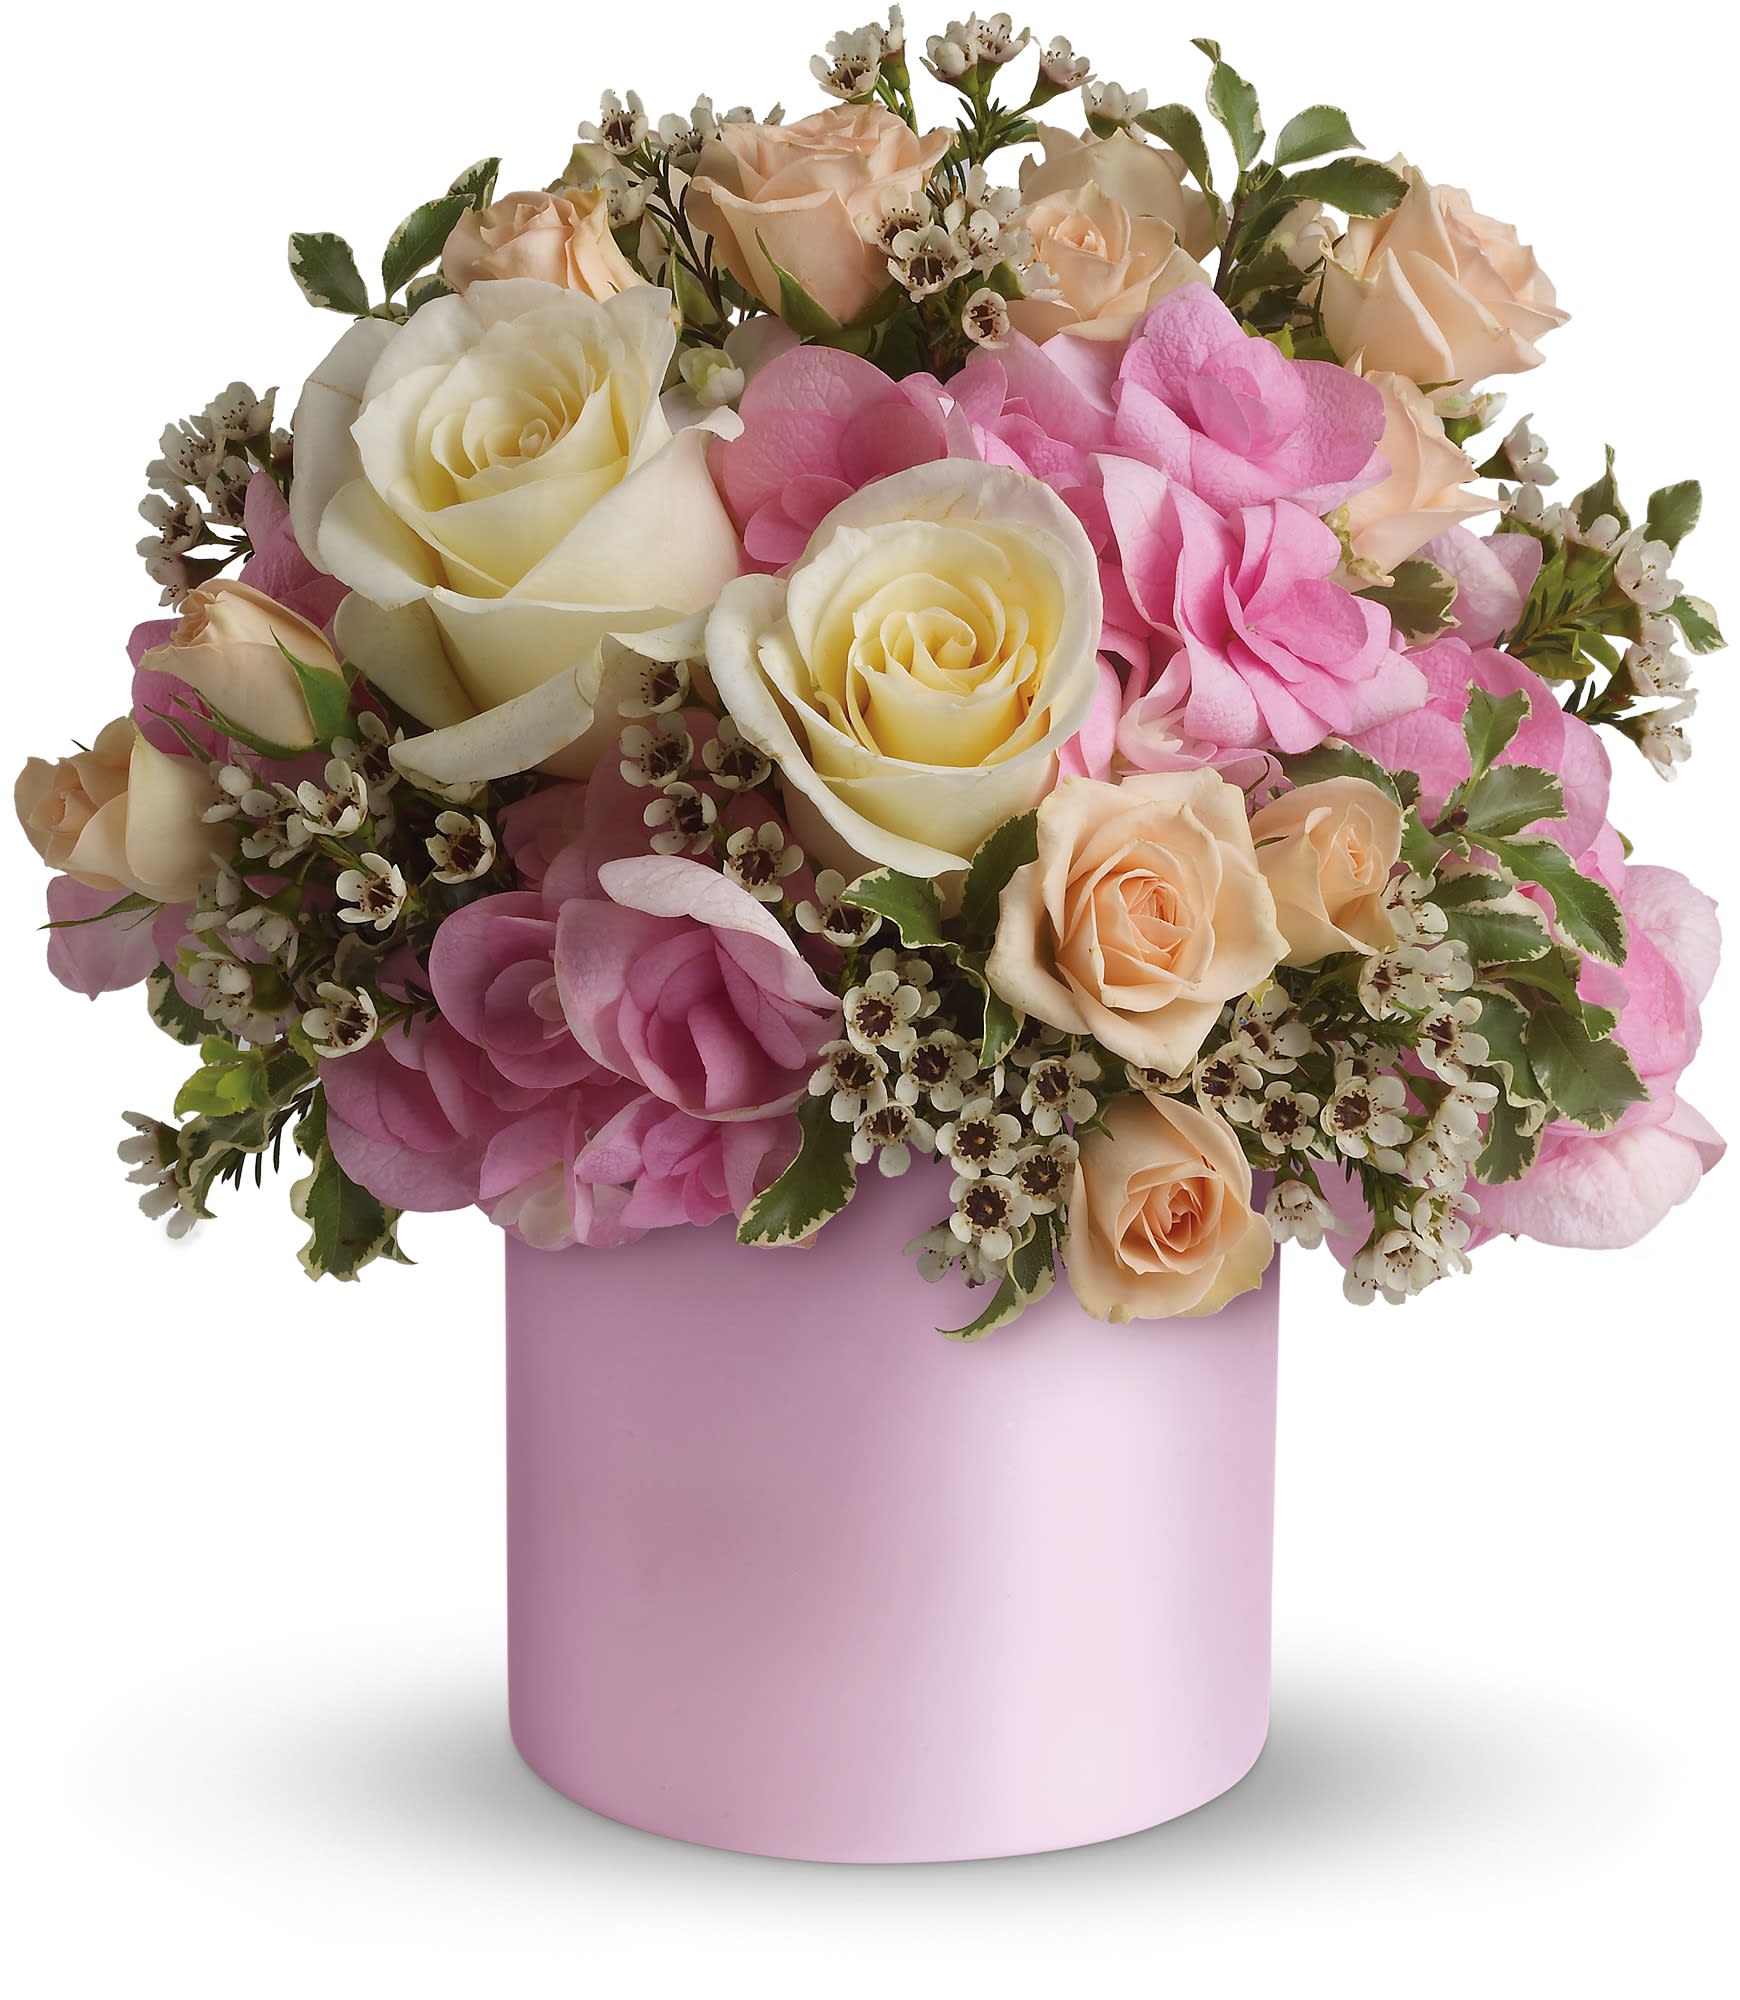 Teleflora's Blushing Beauty  - The thank-you that you get for sending this beautiful bouquet might make you blush! It's so sweet, so soft and so special. With lovely flowers delivered in a pink satiny vase, what woman wouldn't love this - or you for sending it? 